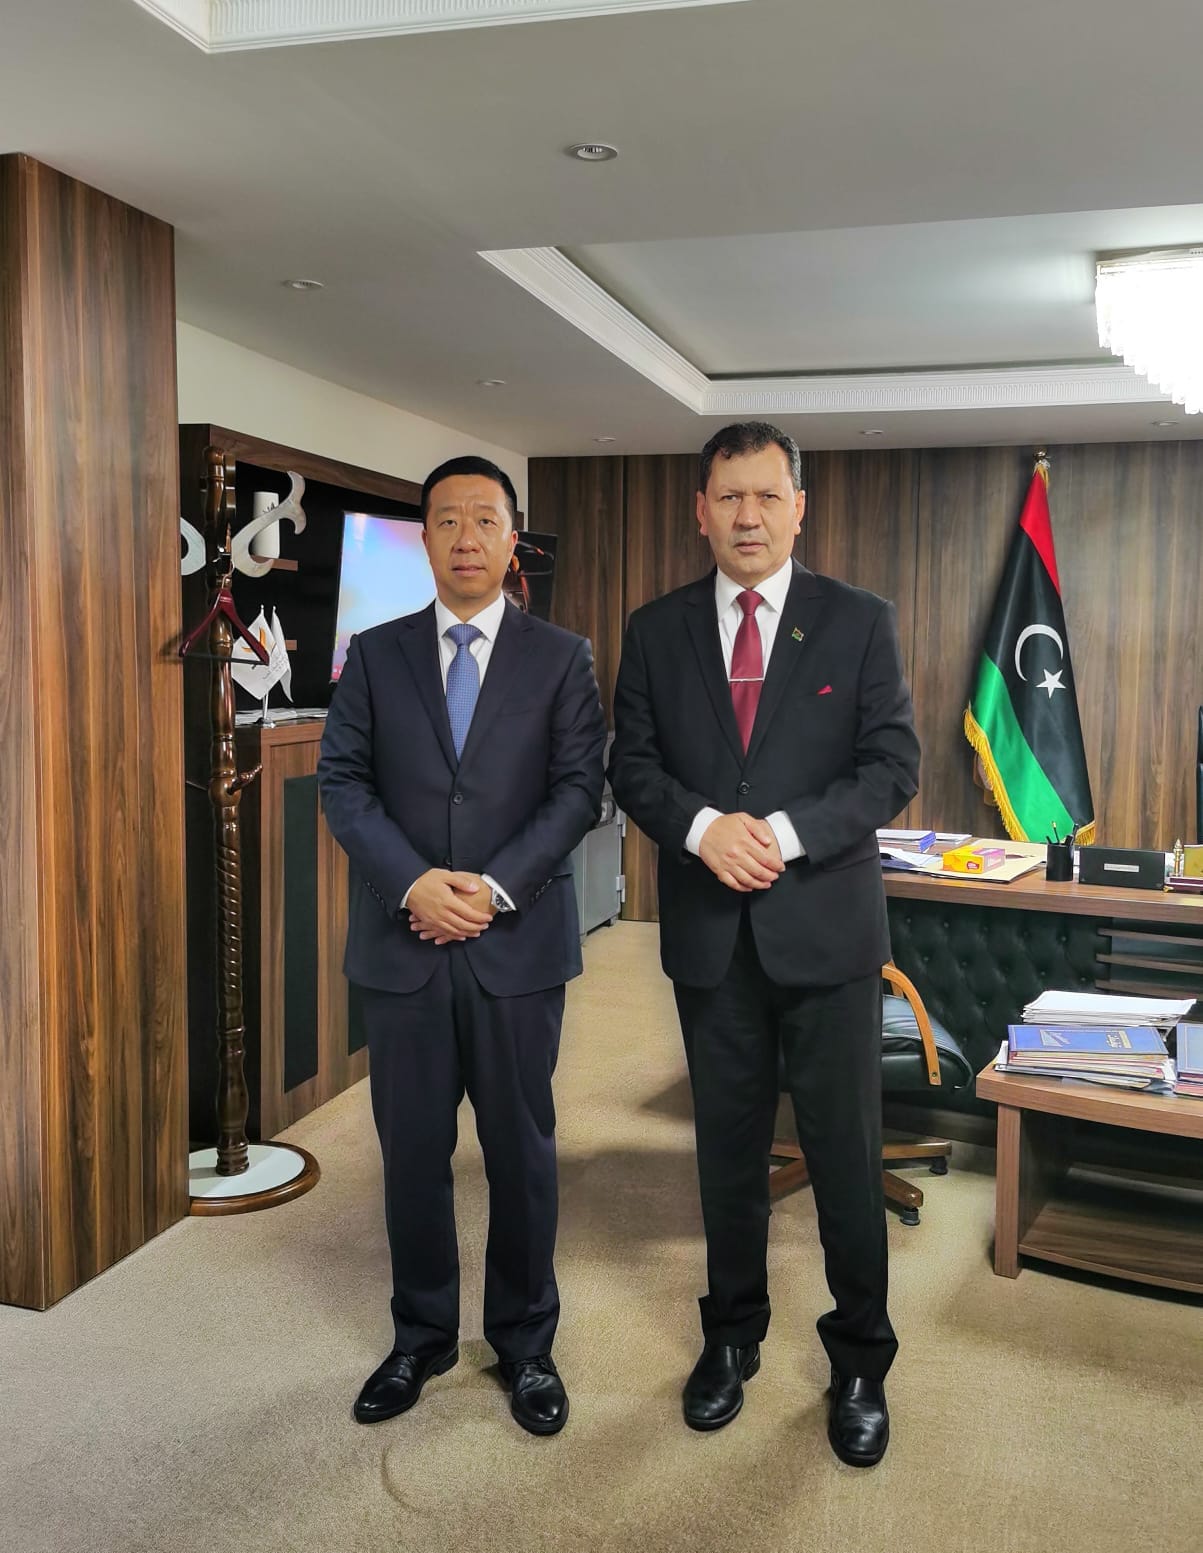 The Undersecretary of the Ministry of Foreign Affairs for Political Affairs meets with the Chargé d'Affaires of the Chinese Embassy in Libya.